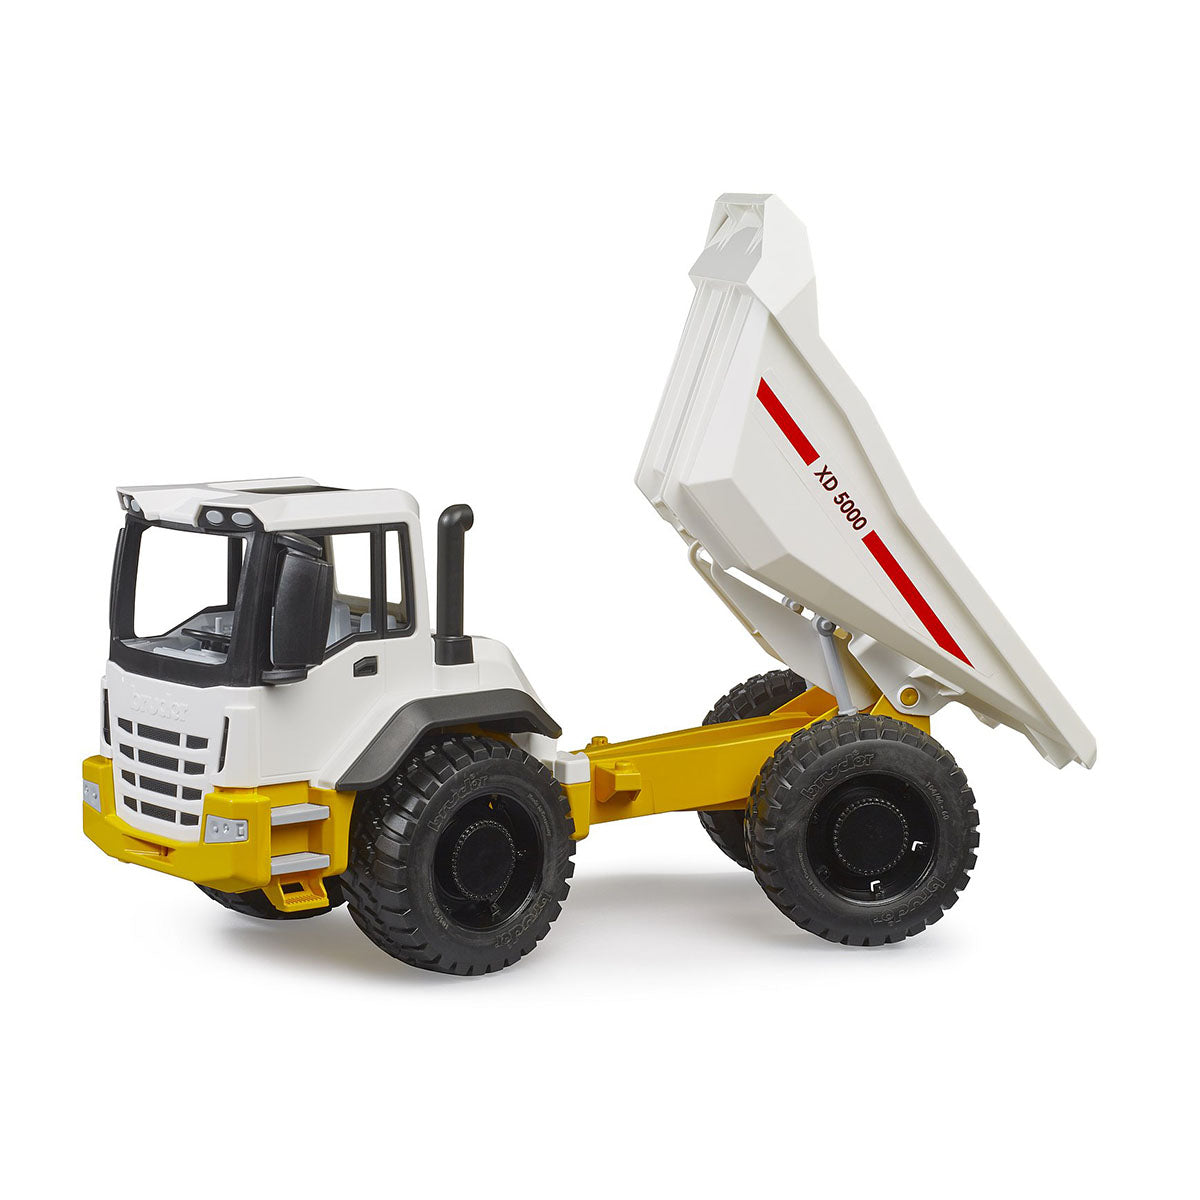 Roadmax dumptruck construction toy with bucket raised in dumping position.